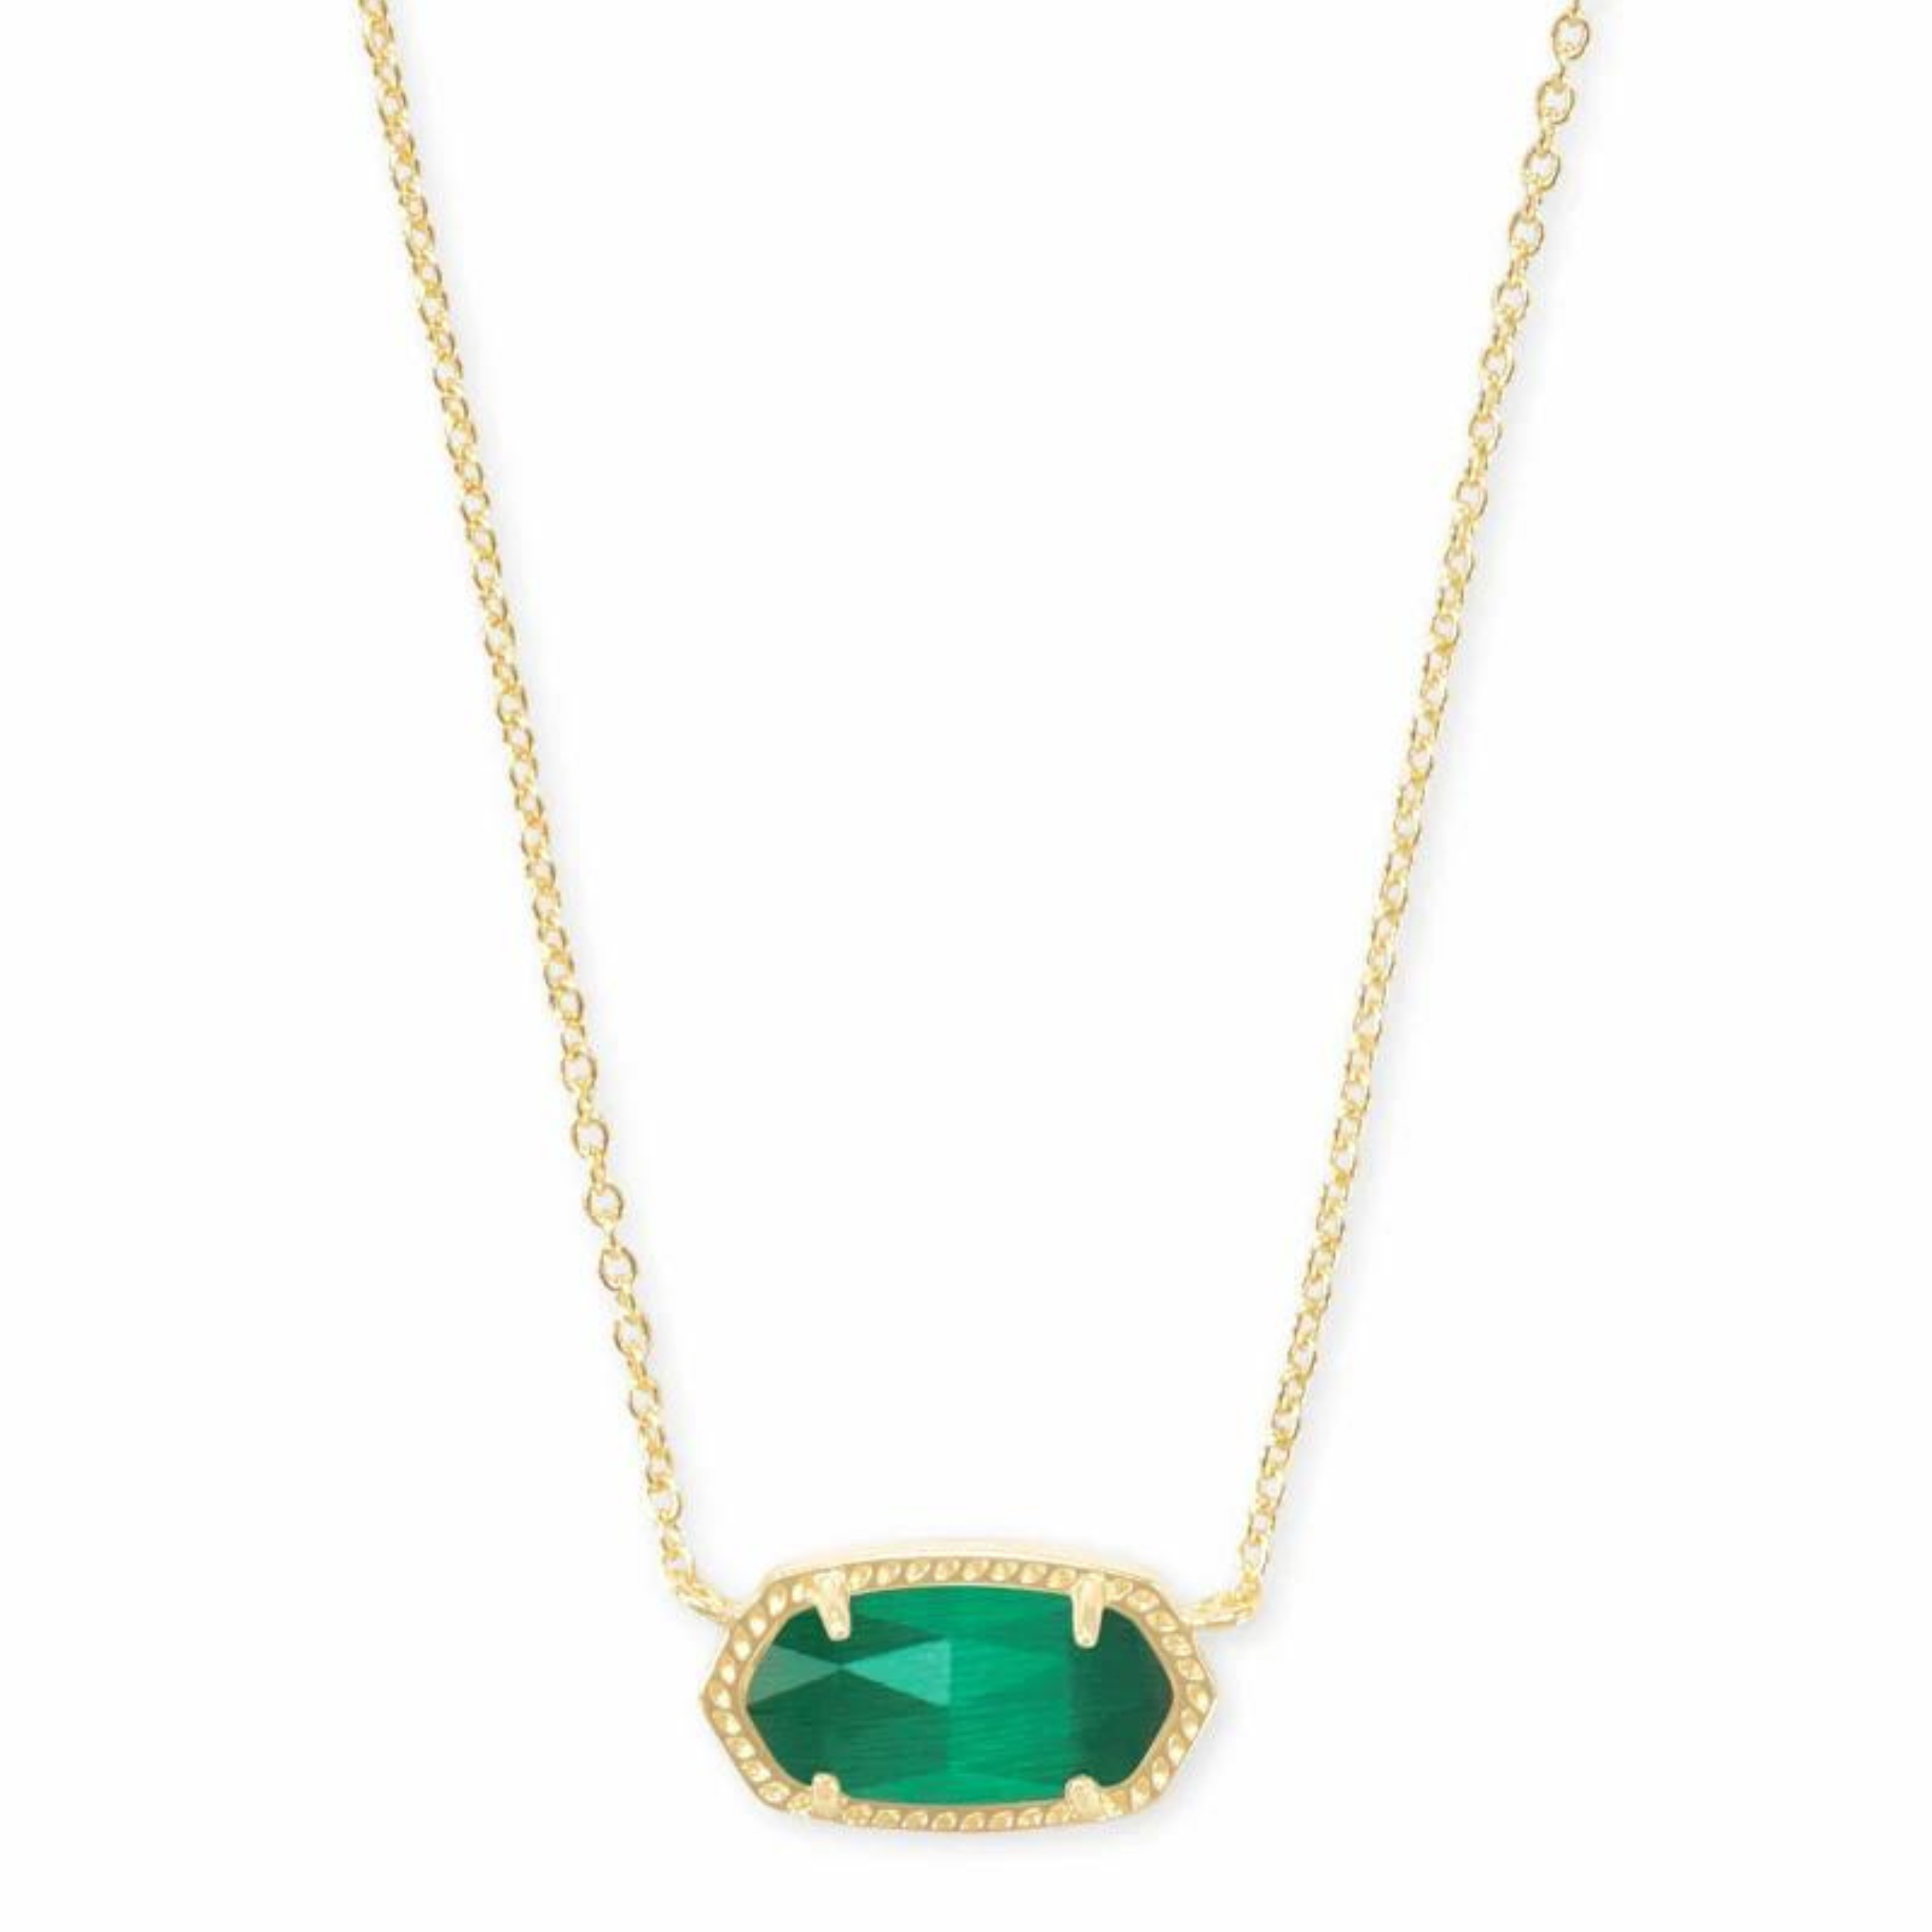 Gold necklace with an emerald cats eye pendant, pictured on a white background.